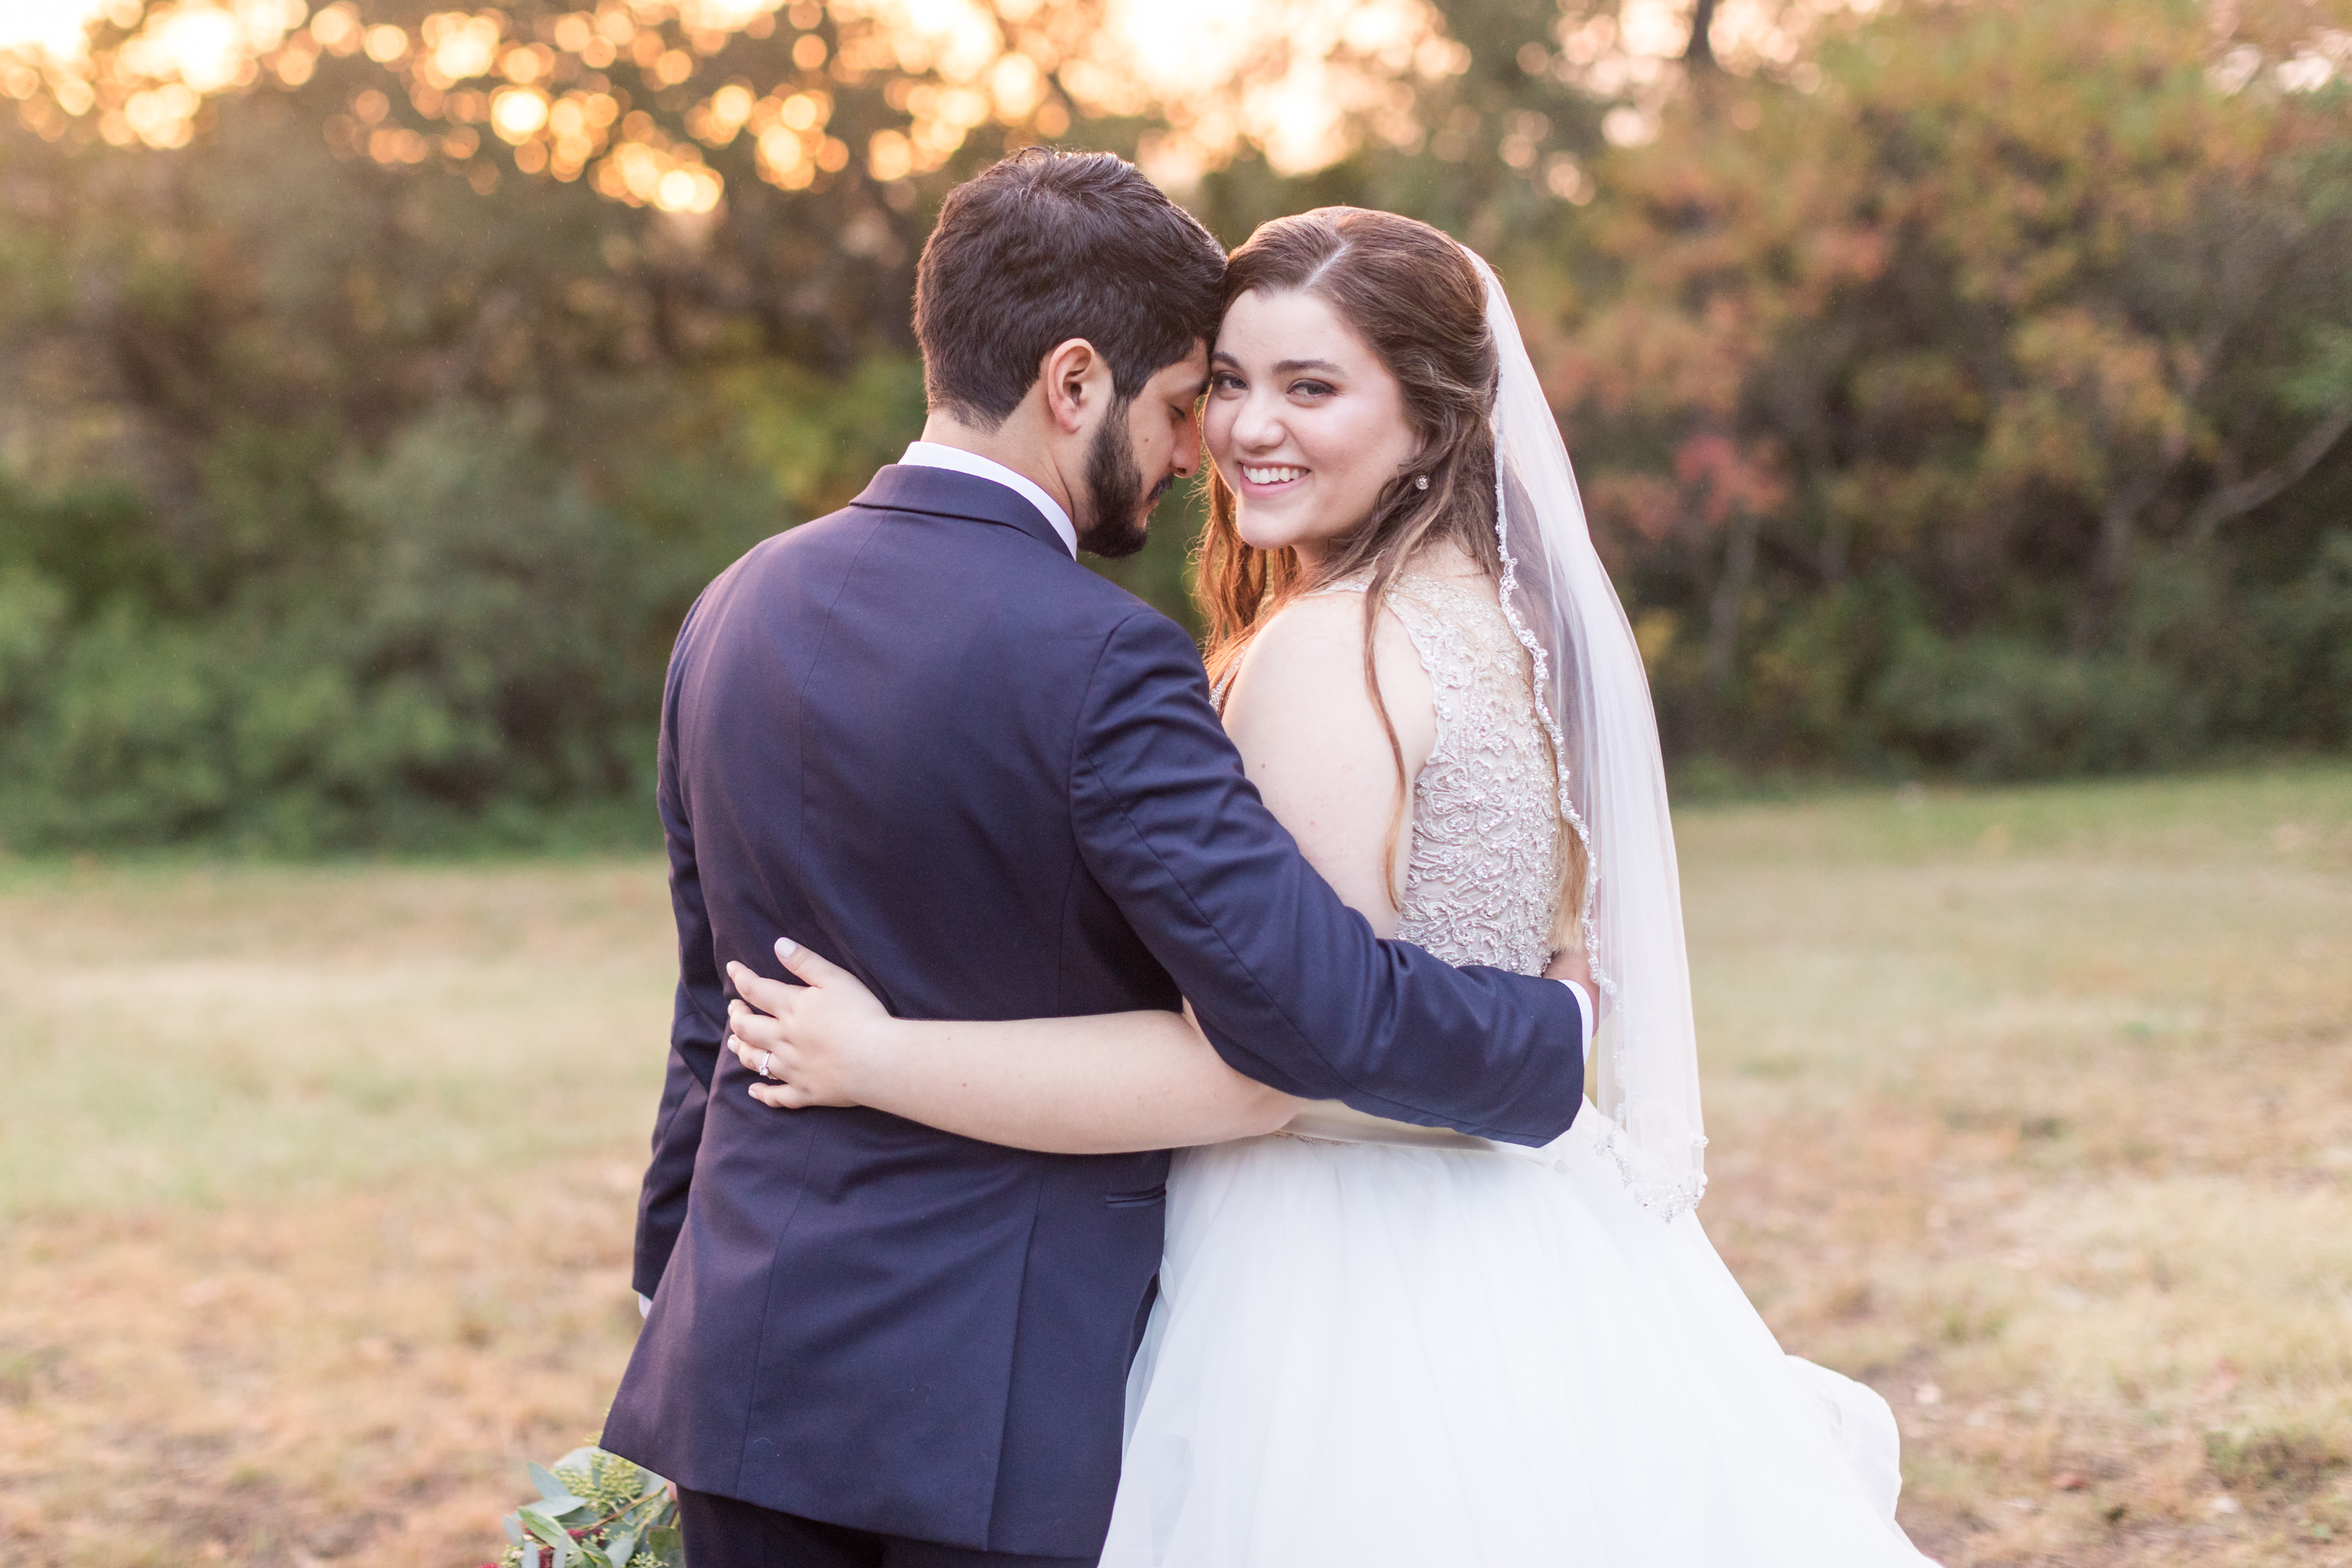 A Burgundy and Navy Disney Inspired Wedding at Gardens at Old Town Helotes in Helotes, TX by Dawn Elizabeth Studios, San Antonio Wedding Photographer